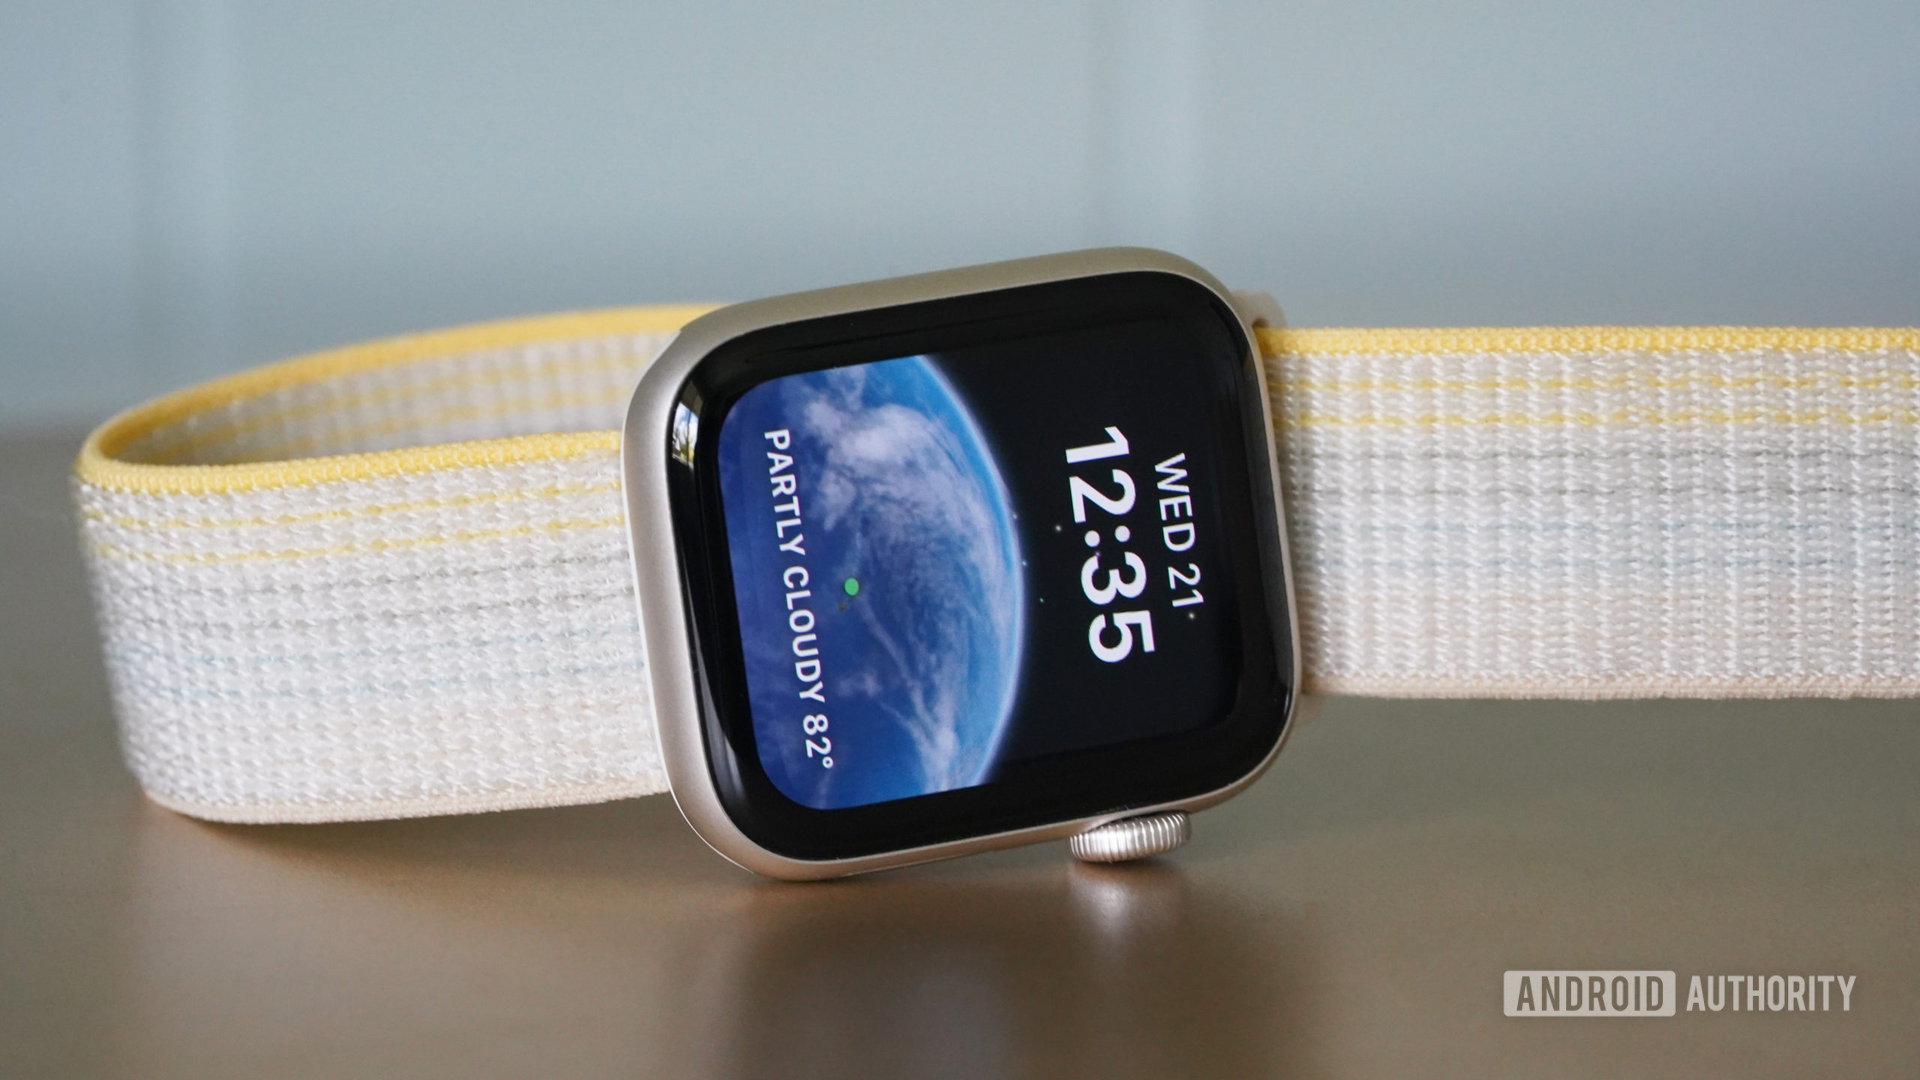 An Apple Watch SE 2 rests on its side, displaying the ASTROnomy watch face.